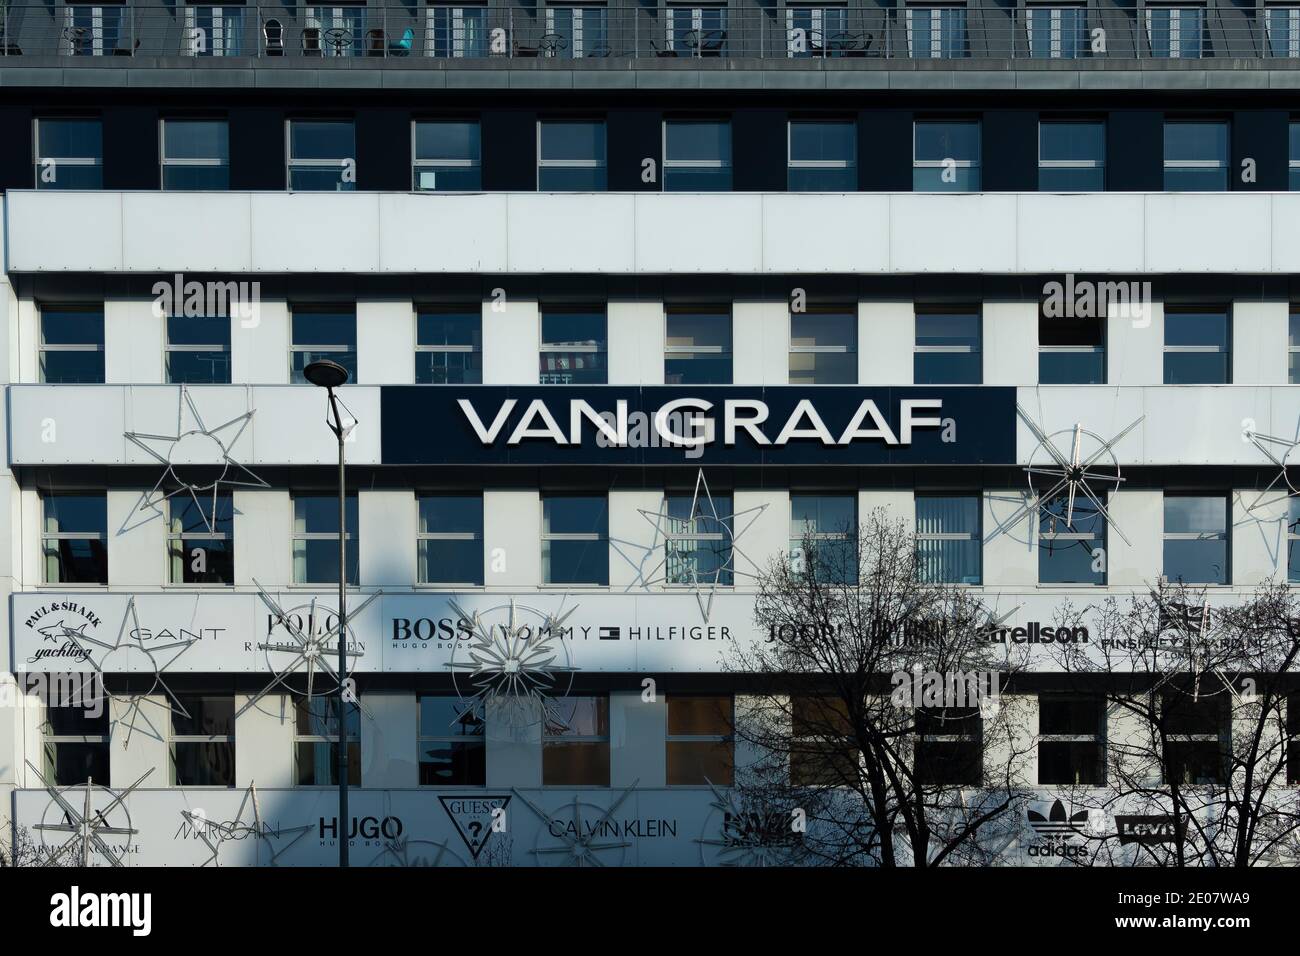 Prague, czech Republic, 12-30-2020. Van Graaf, one of the iconic department  stores in Prague, exhibiting their brand and products in a prestigious bui  Stock Photo - Alamy